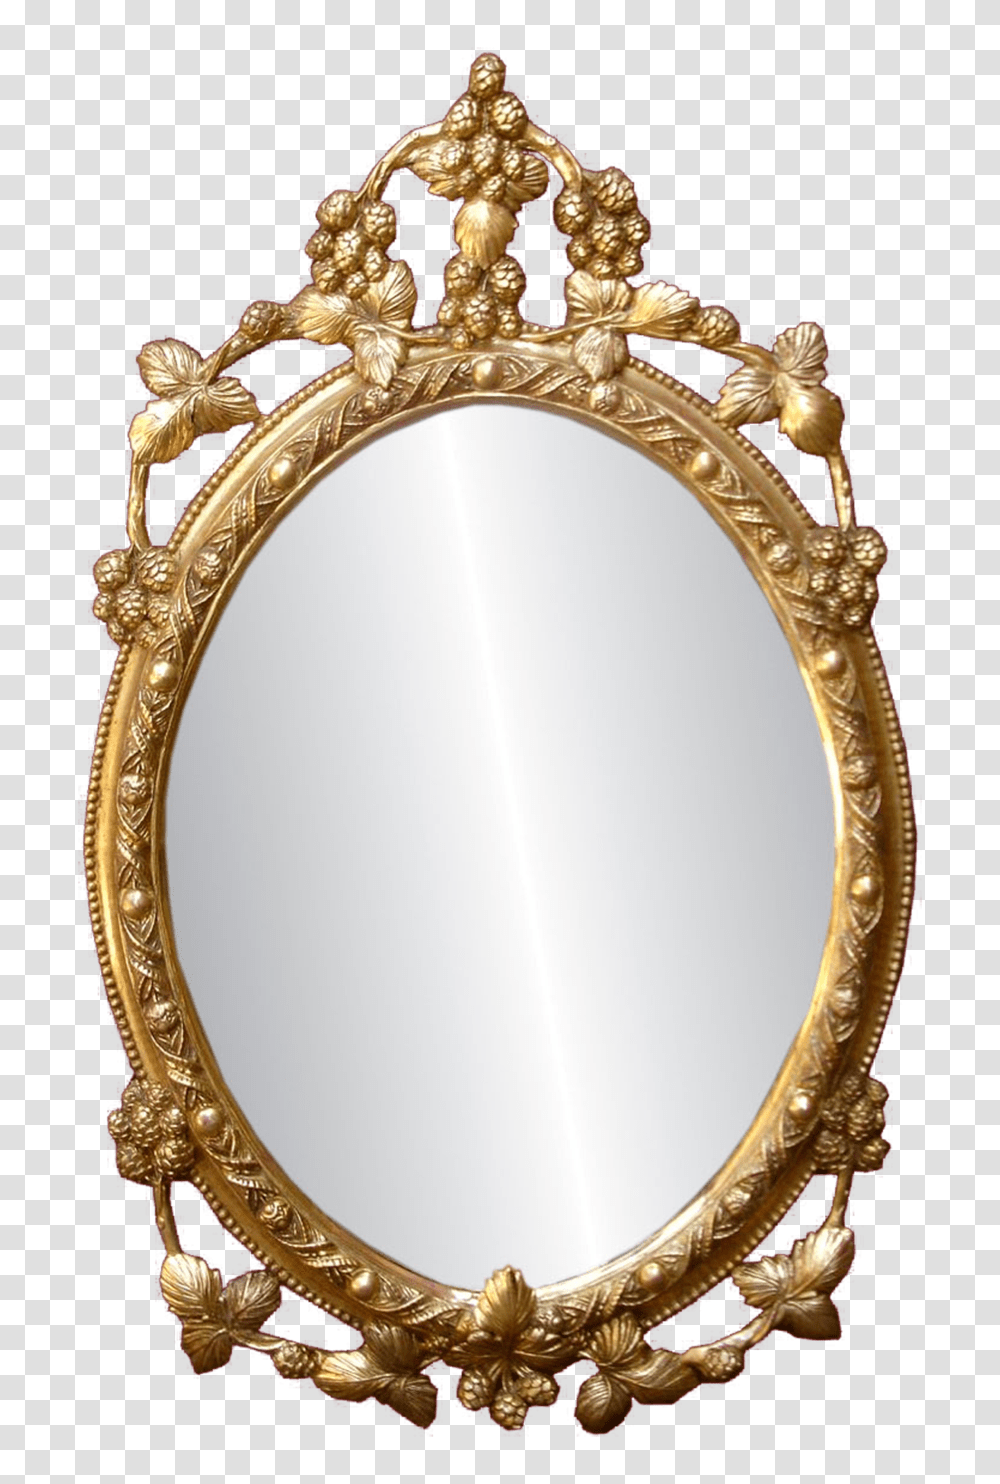 Mirror File, Furniture, Necklace, Jewelry, Accessories Transparent Png